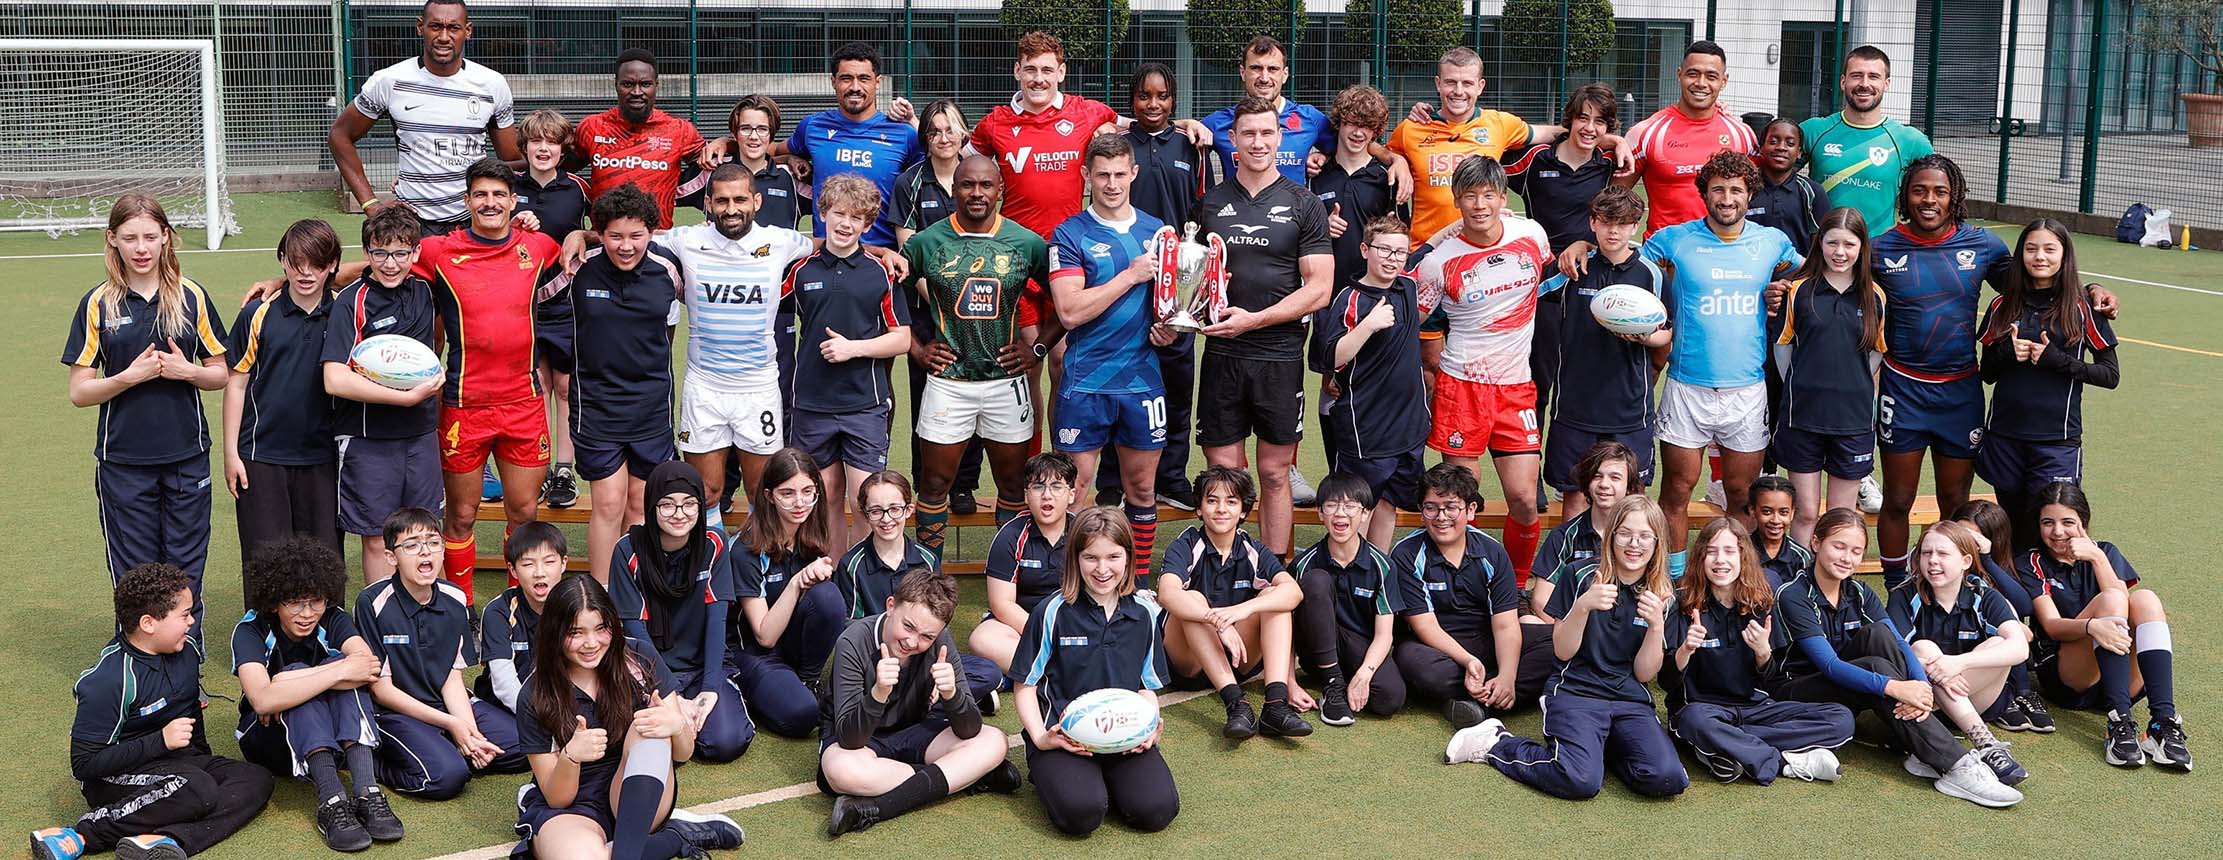 Captain's photo prior to the hsbc london sevens at holland park school on 17 may, 2023 in london, united kingdom.